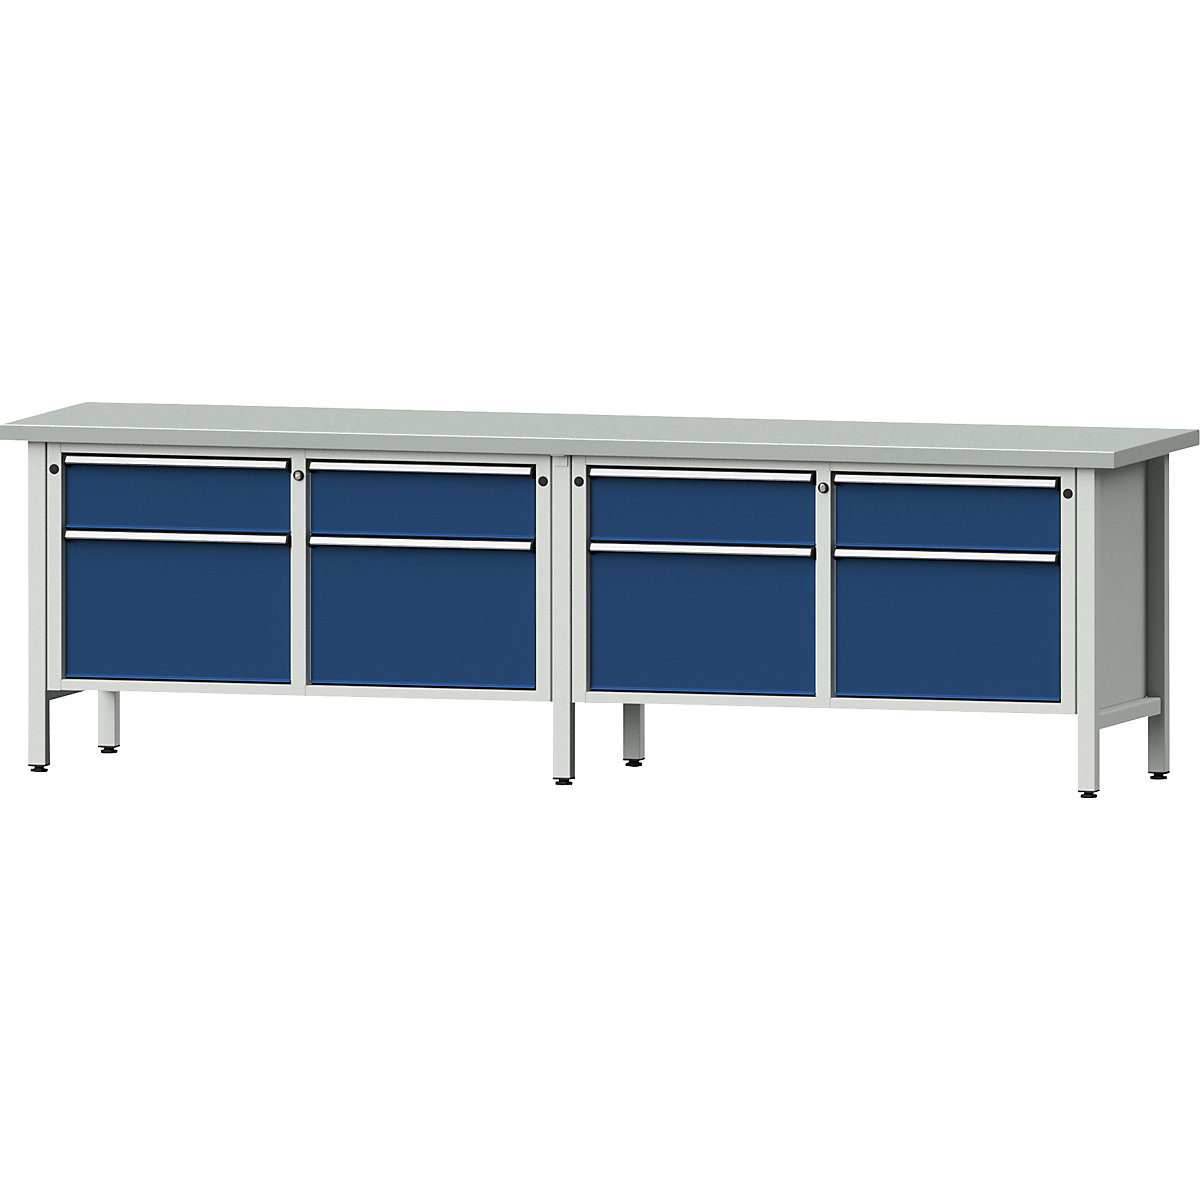 Workbench width 2800 mm, frame construction – ANKE, 8 drawers, sheet steel covered worktop-10